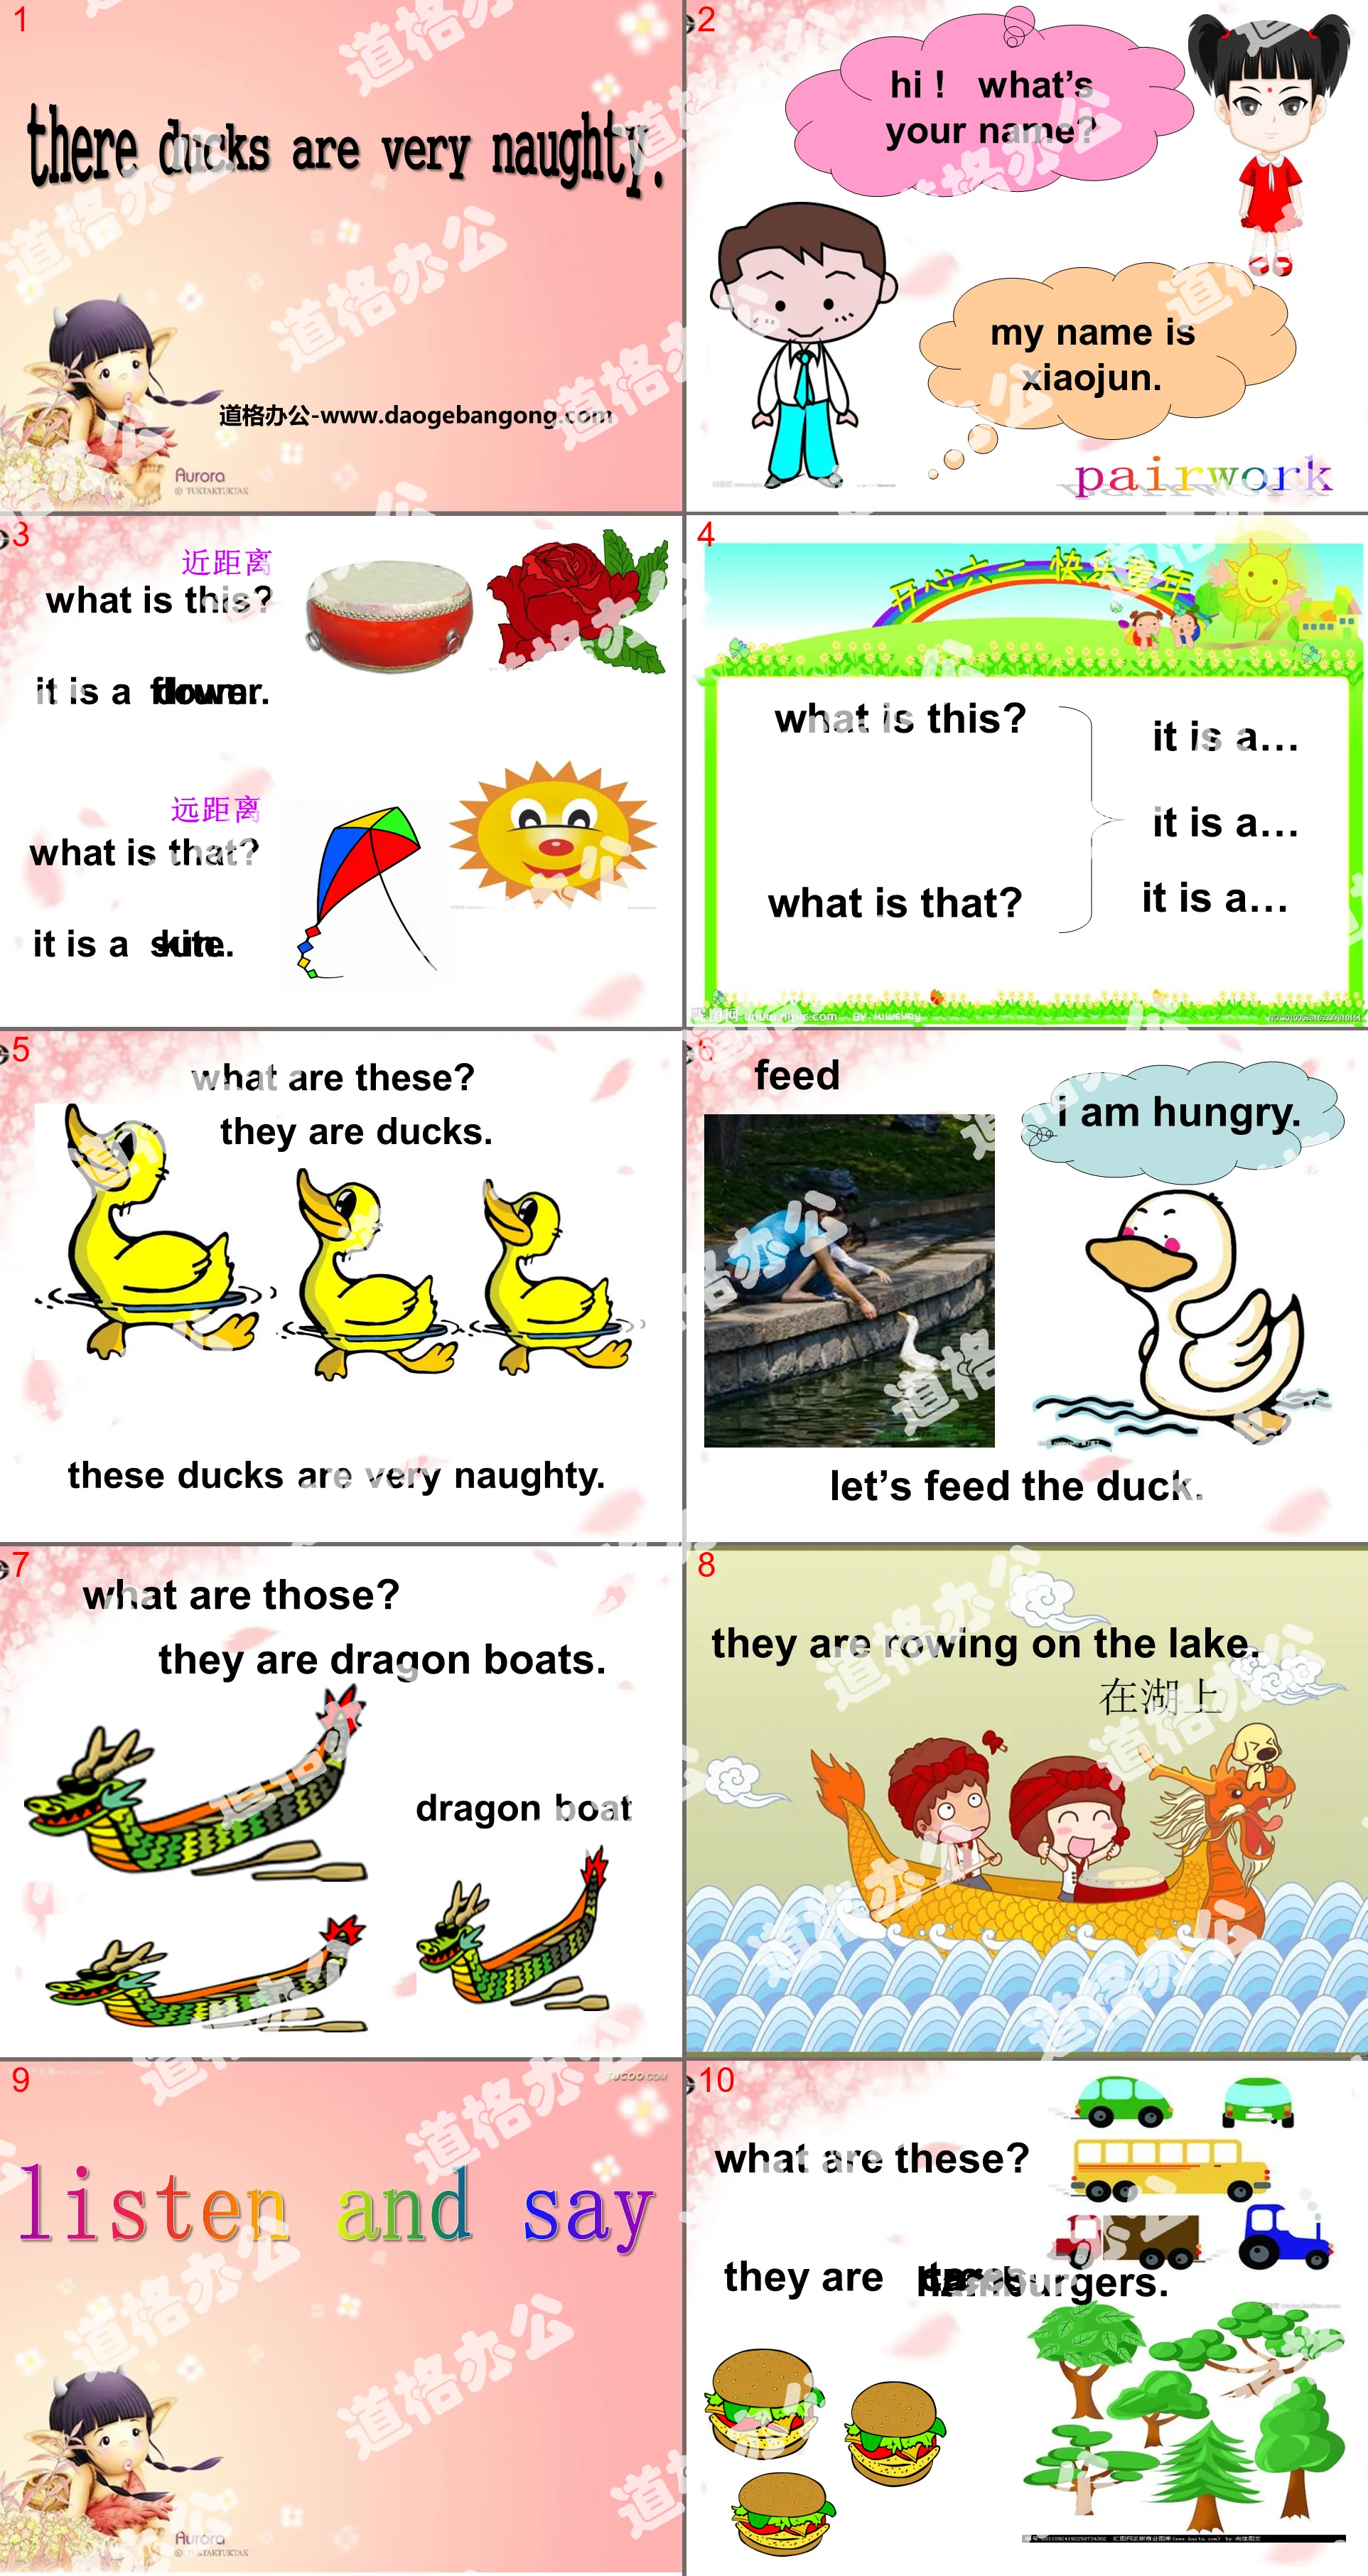 《These ducks are very naughty!》PPT課件4